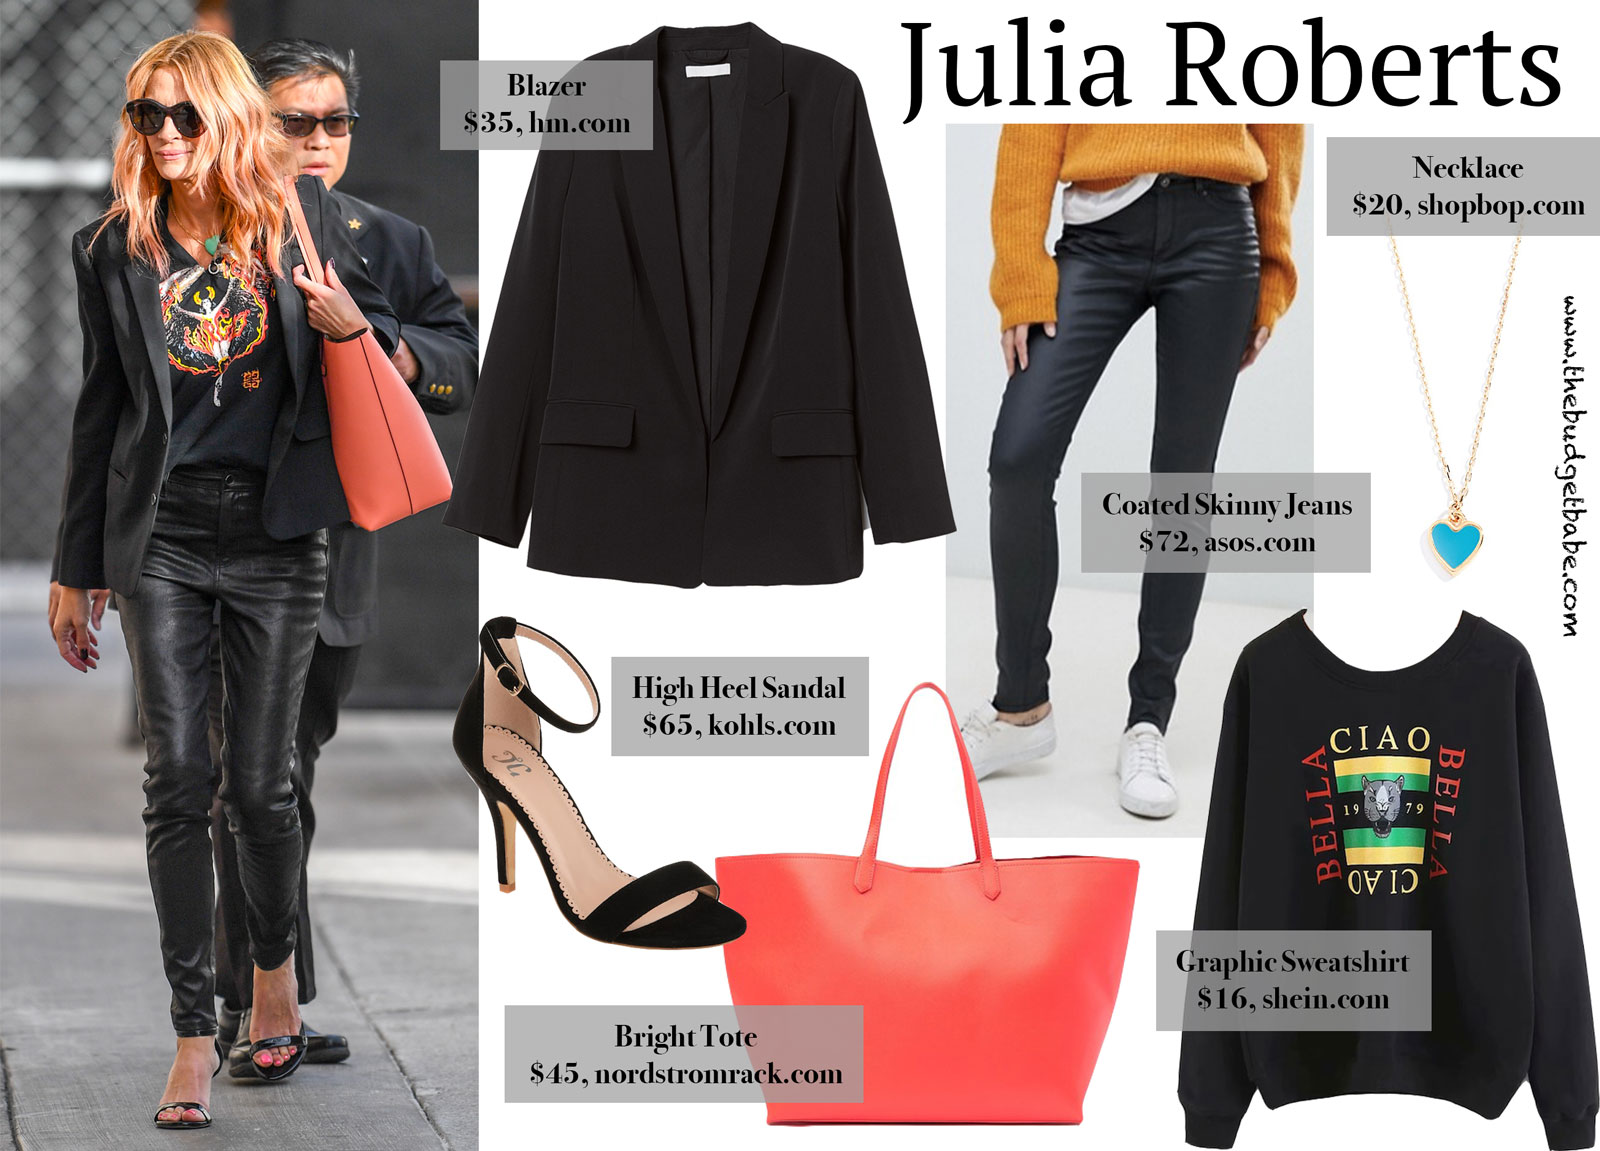 Julia Roberts Graphic Givenchy Sweatshirt Look for Less